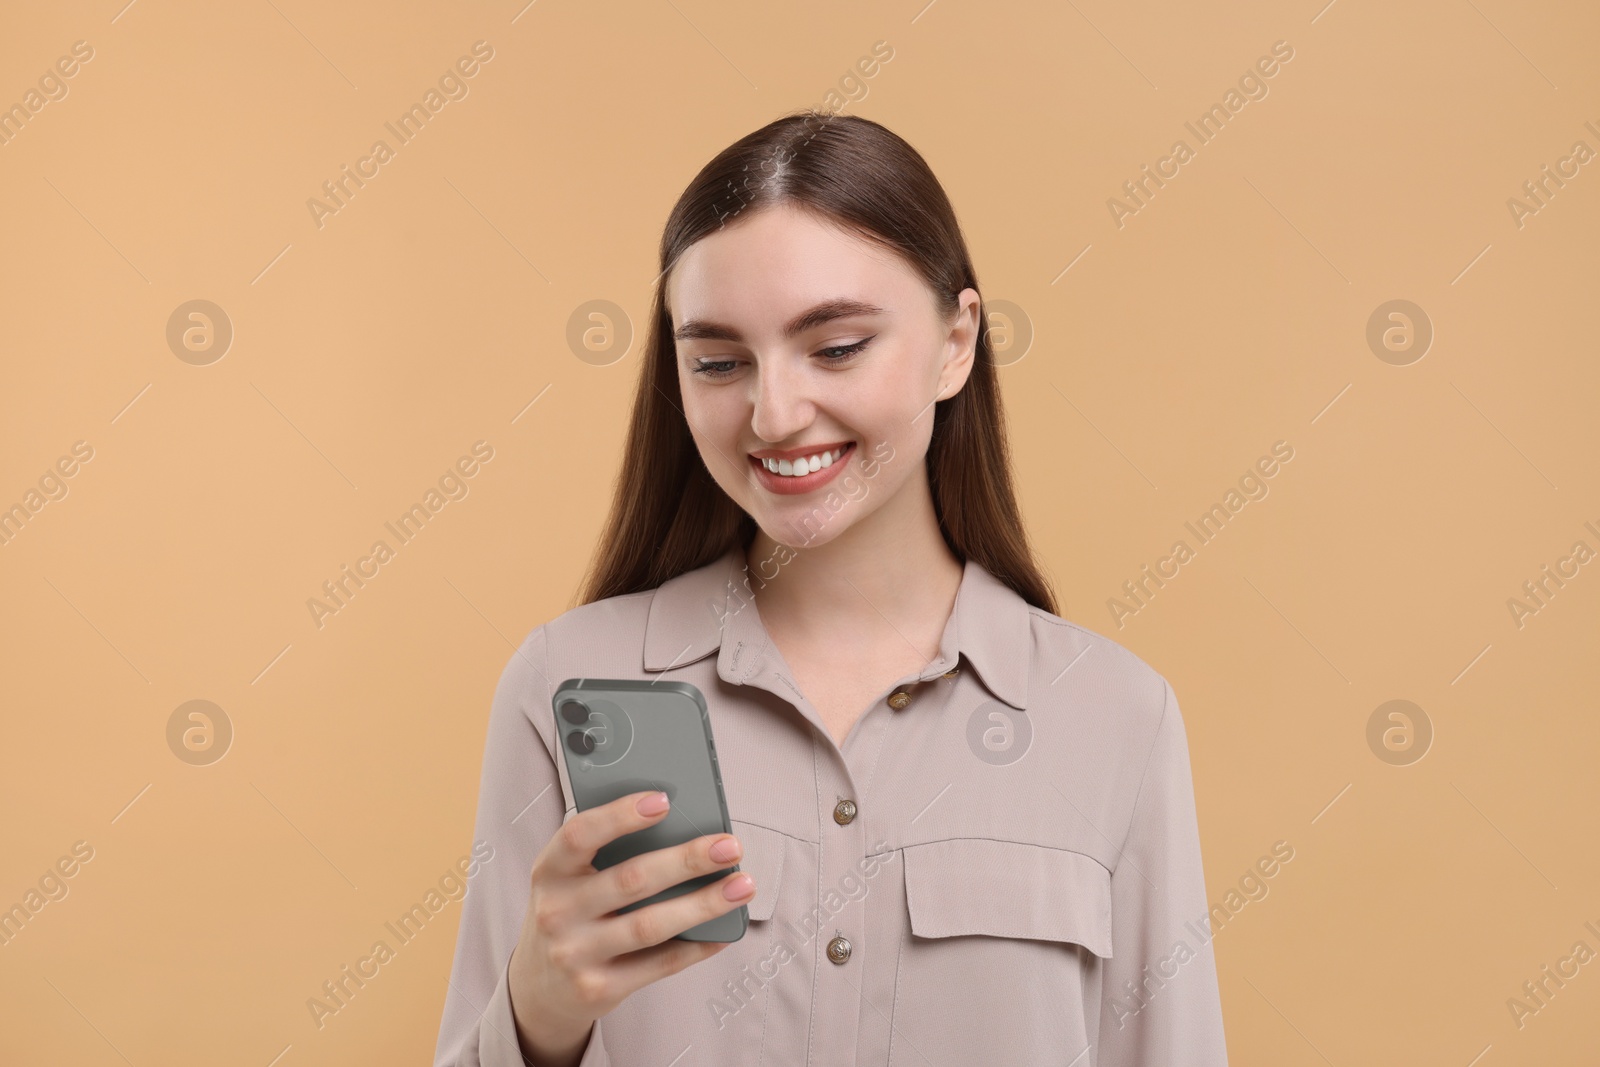 Photo of Smiling woman using smartphone on beige background